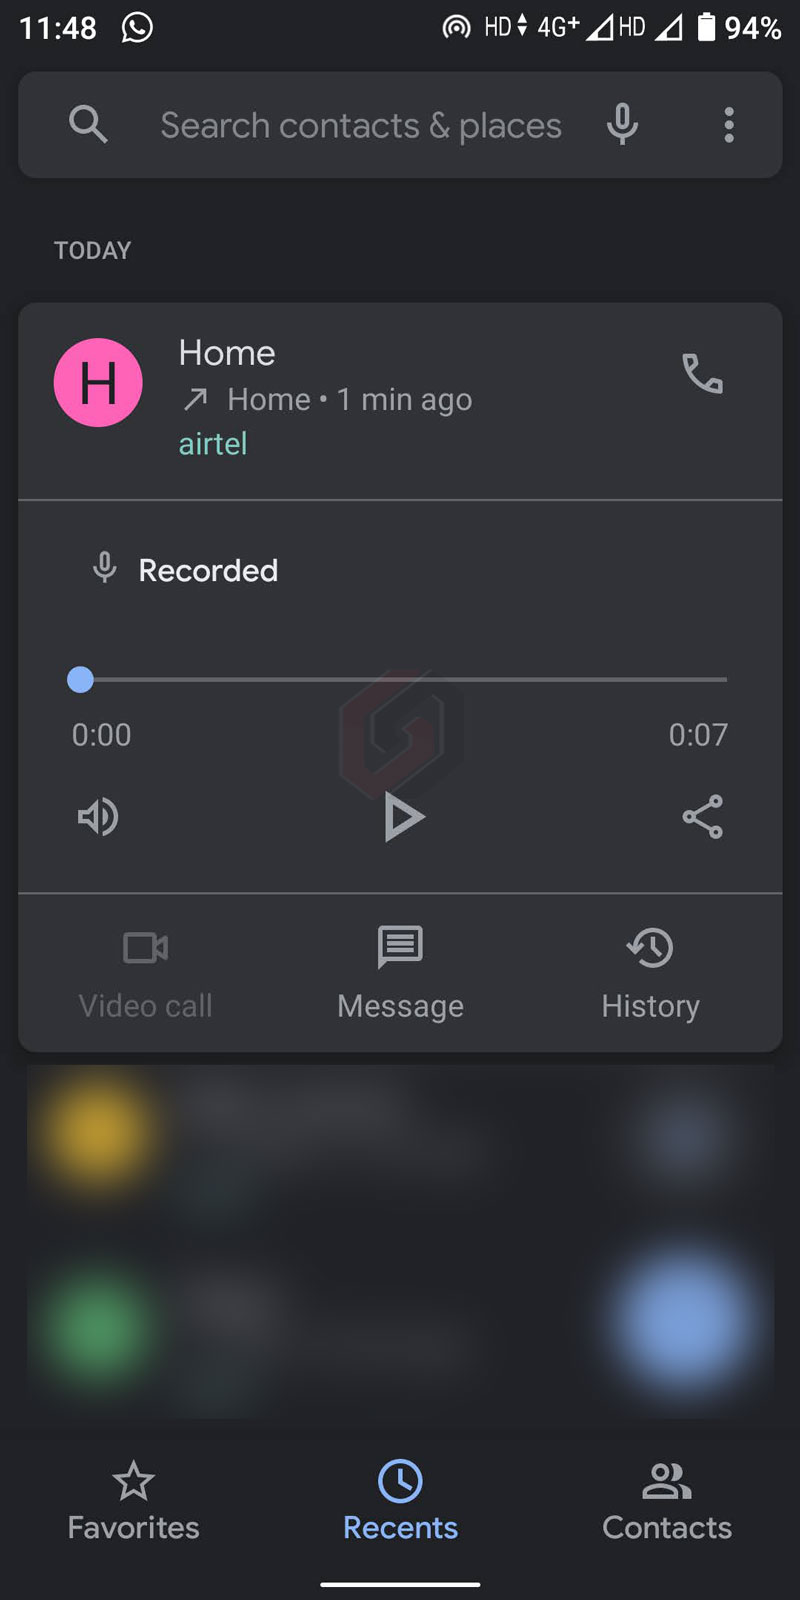 Google Phone Call Recording now Available on Mi A2 in India